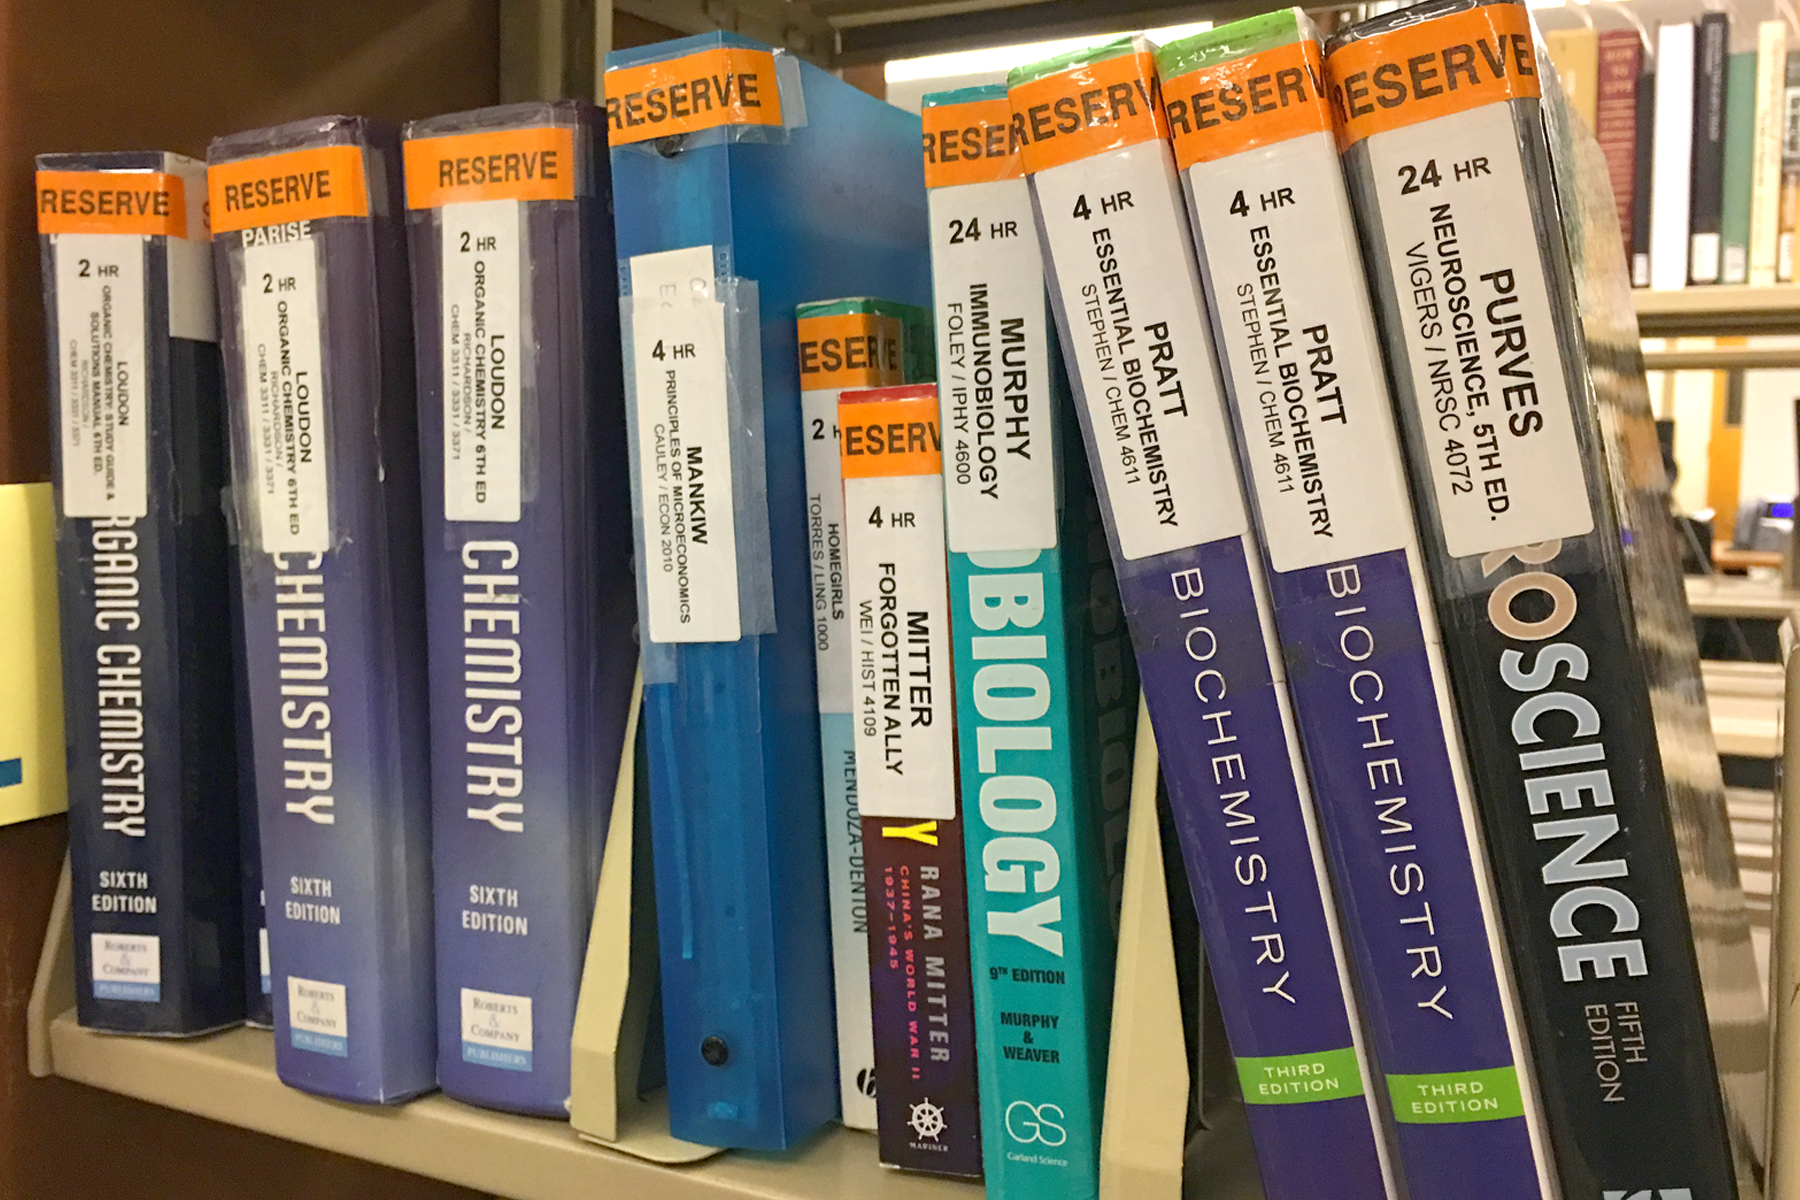 Course reserves textbooks in library